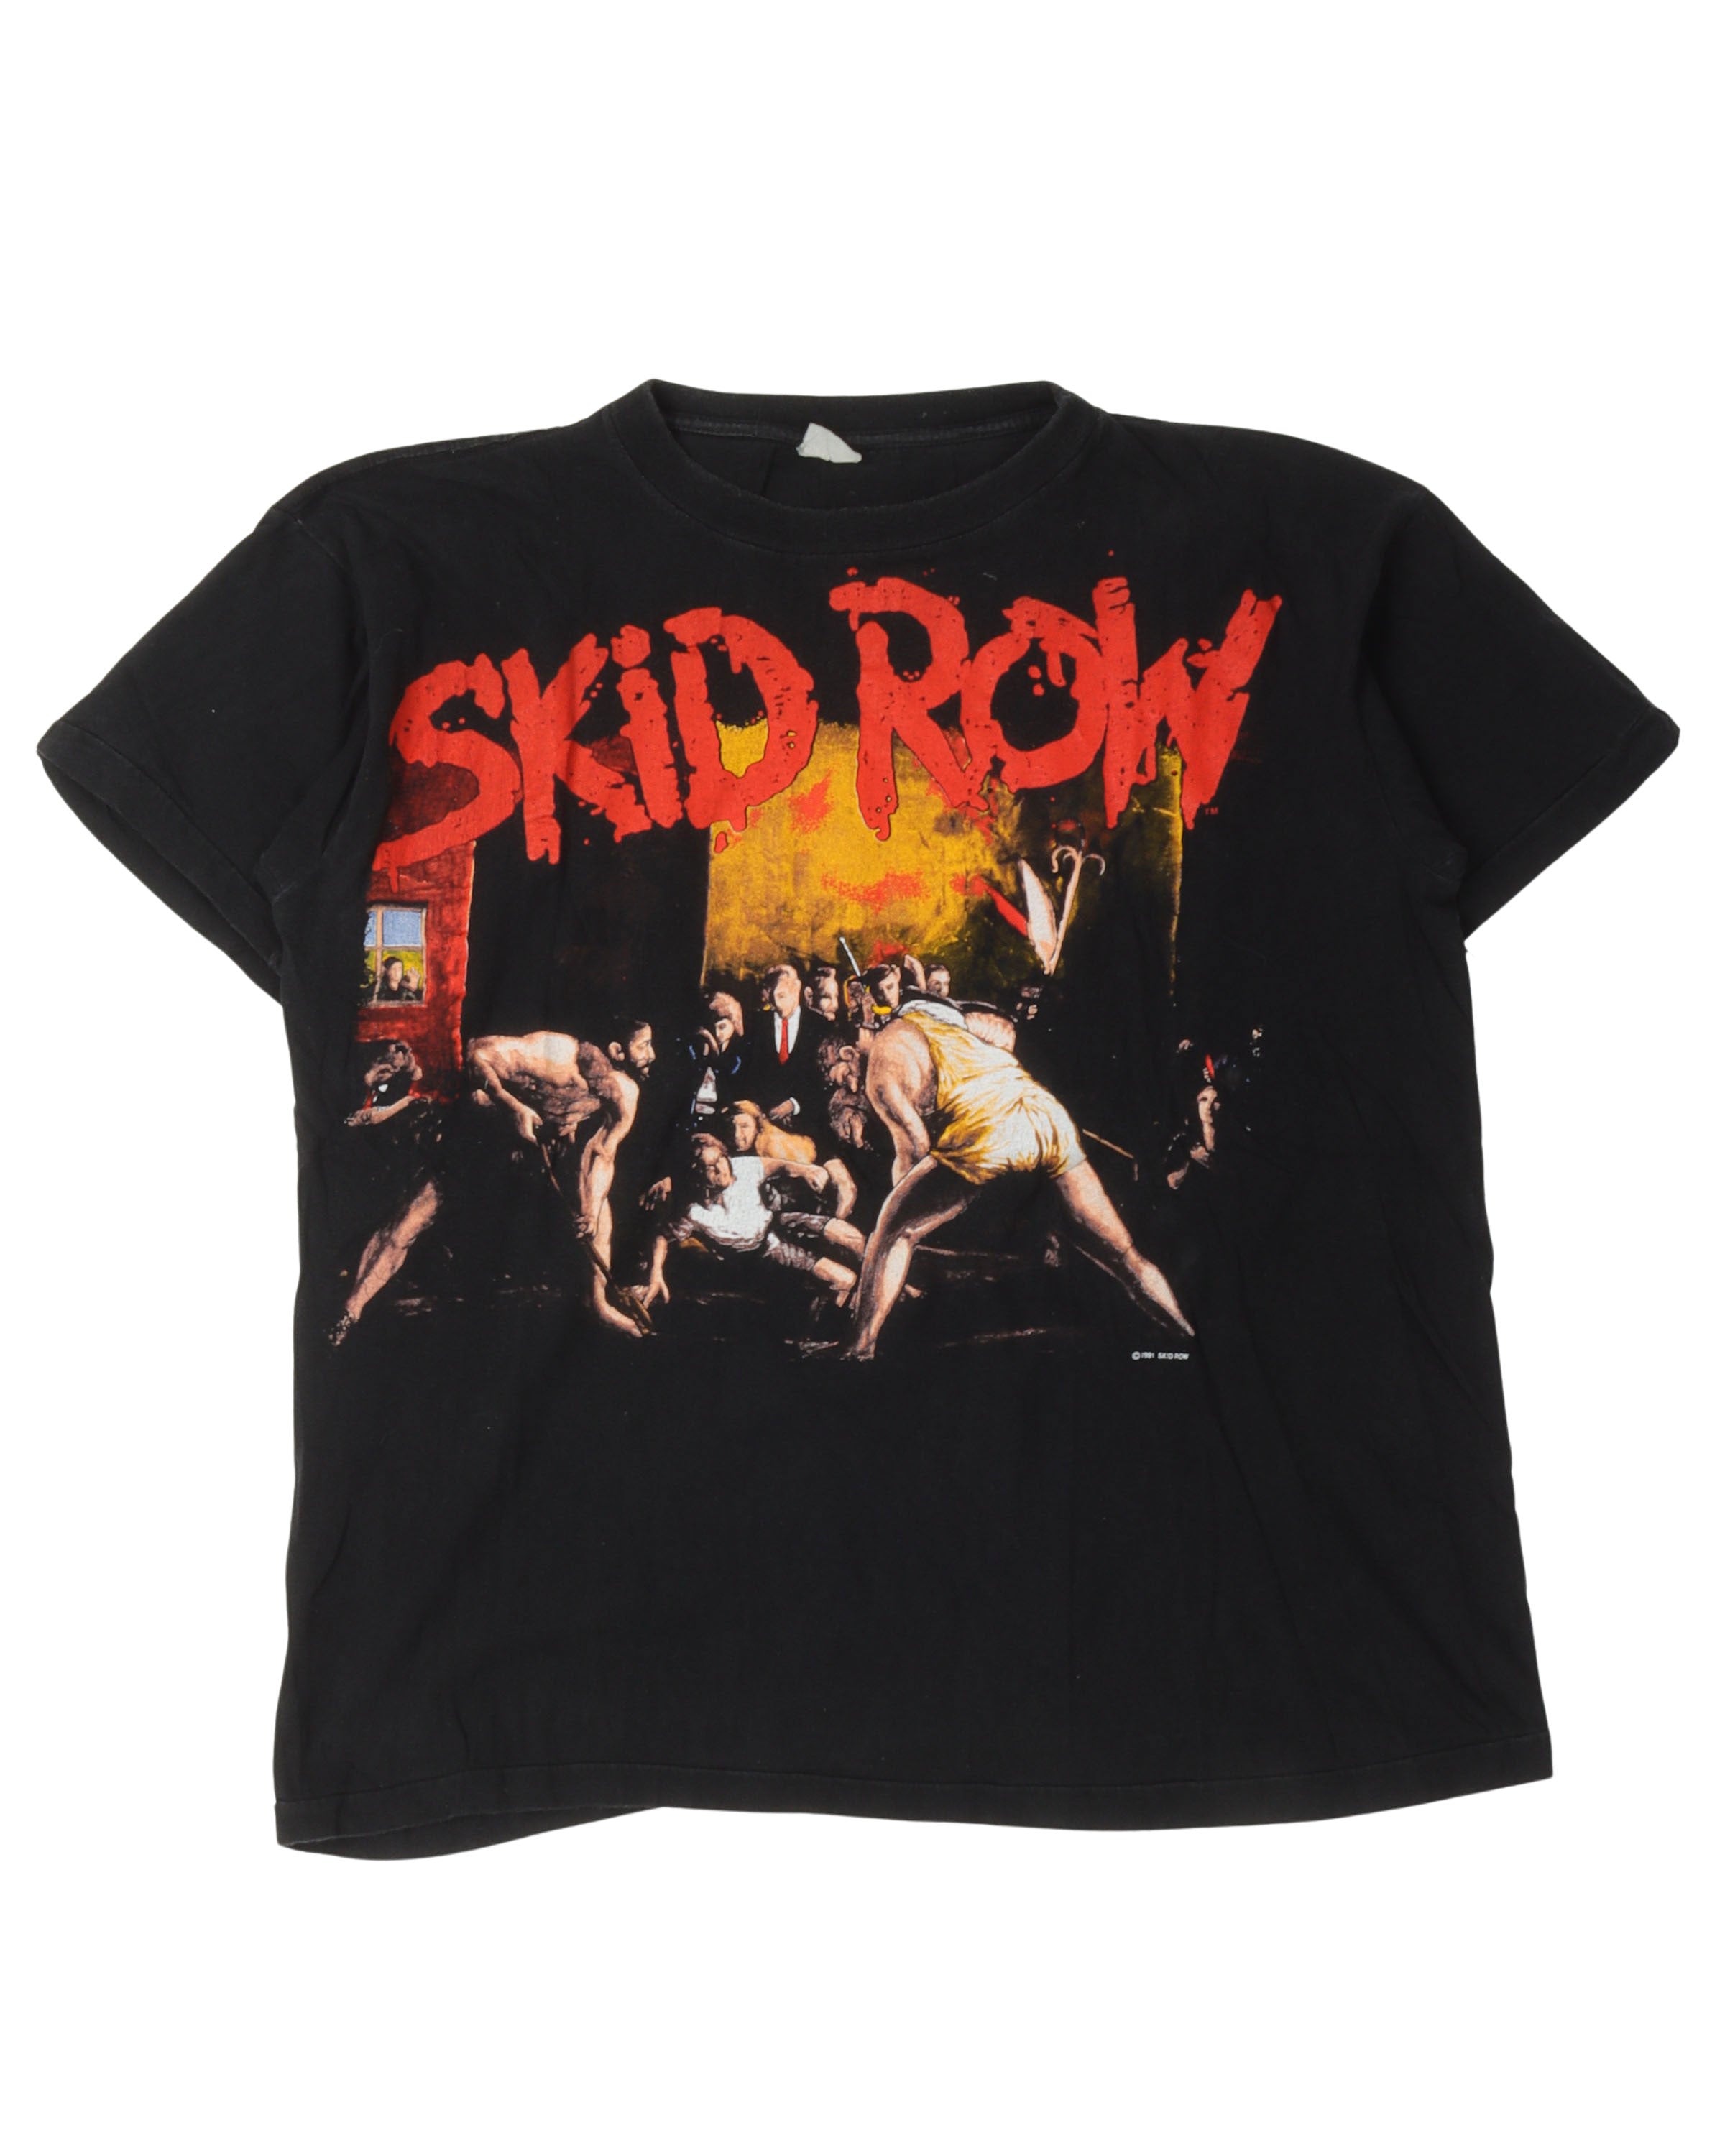 Skid Row 1991 Slave to the Grind Tour T-Shirt